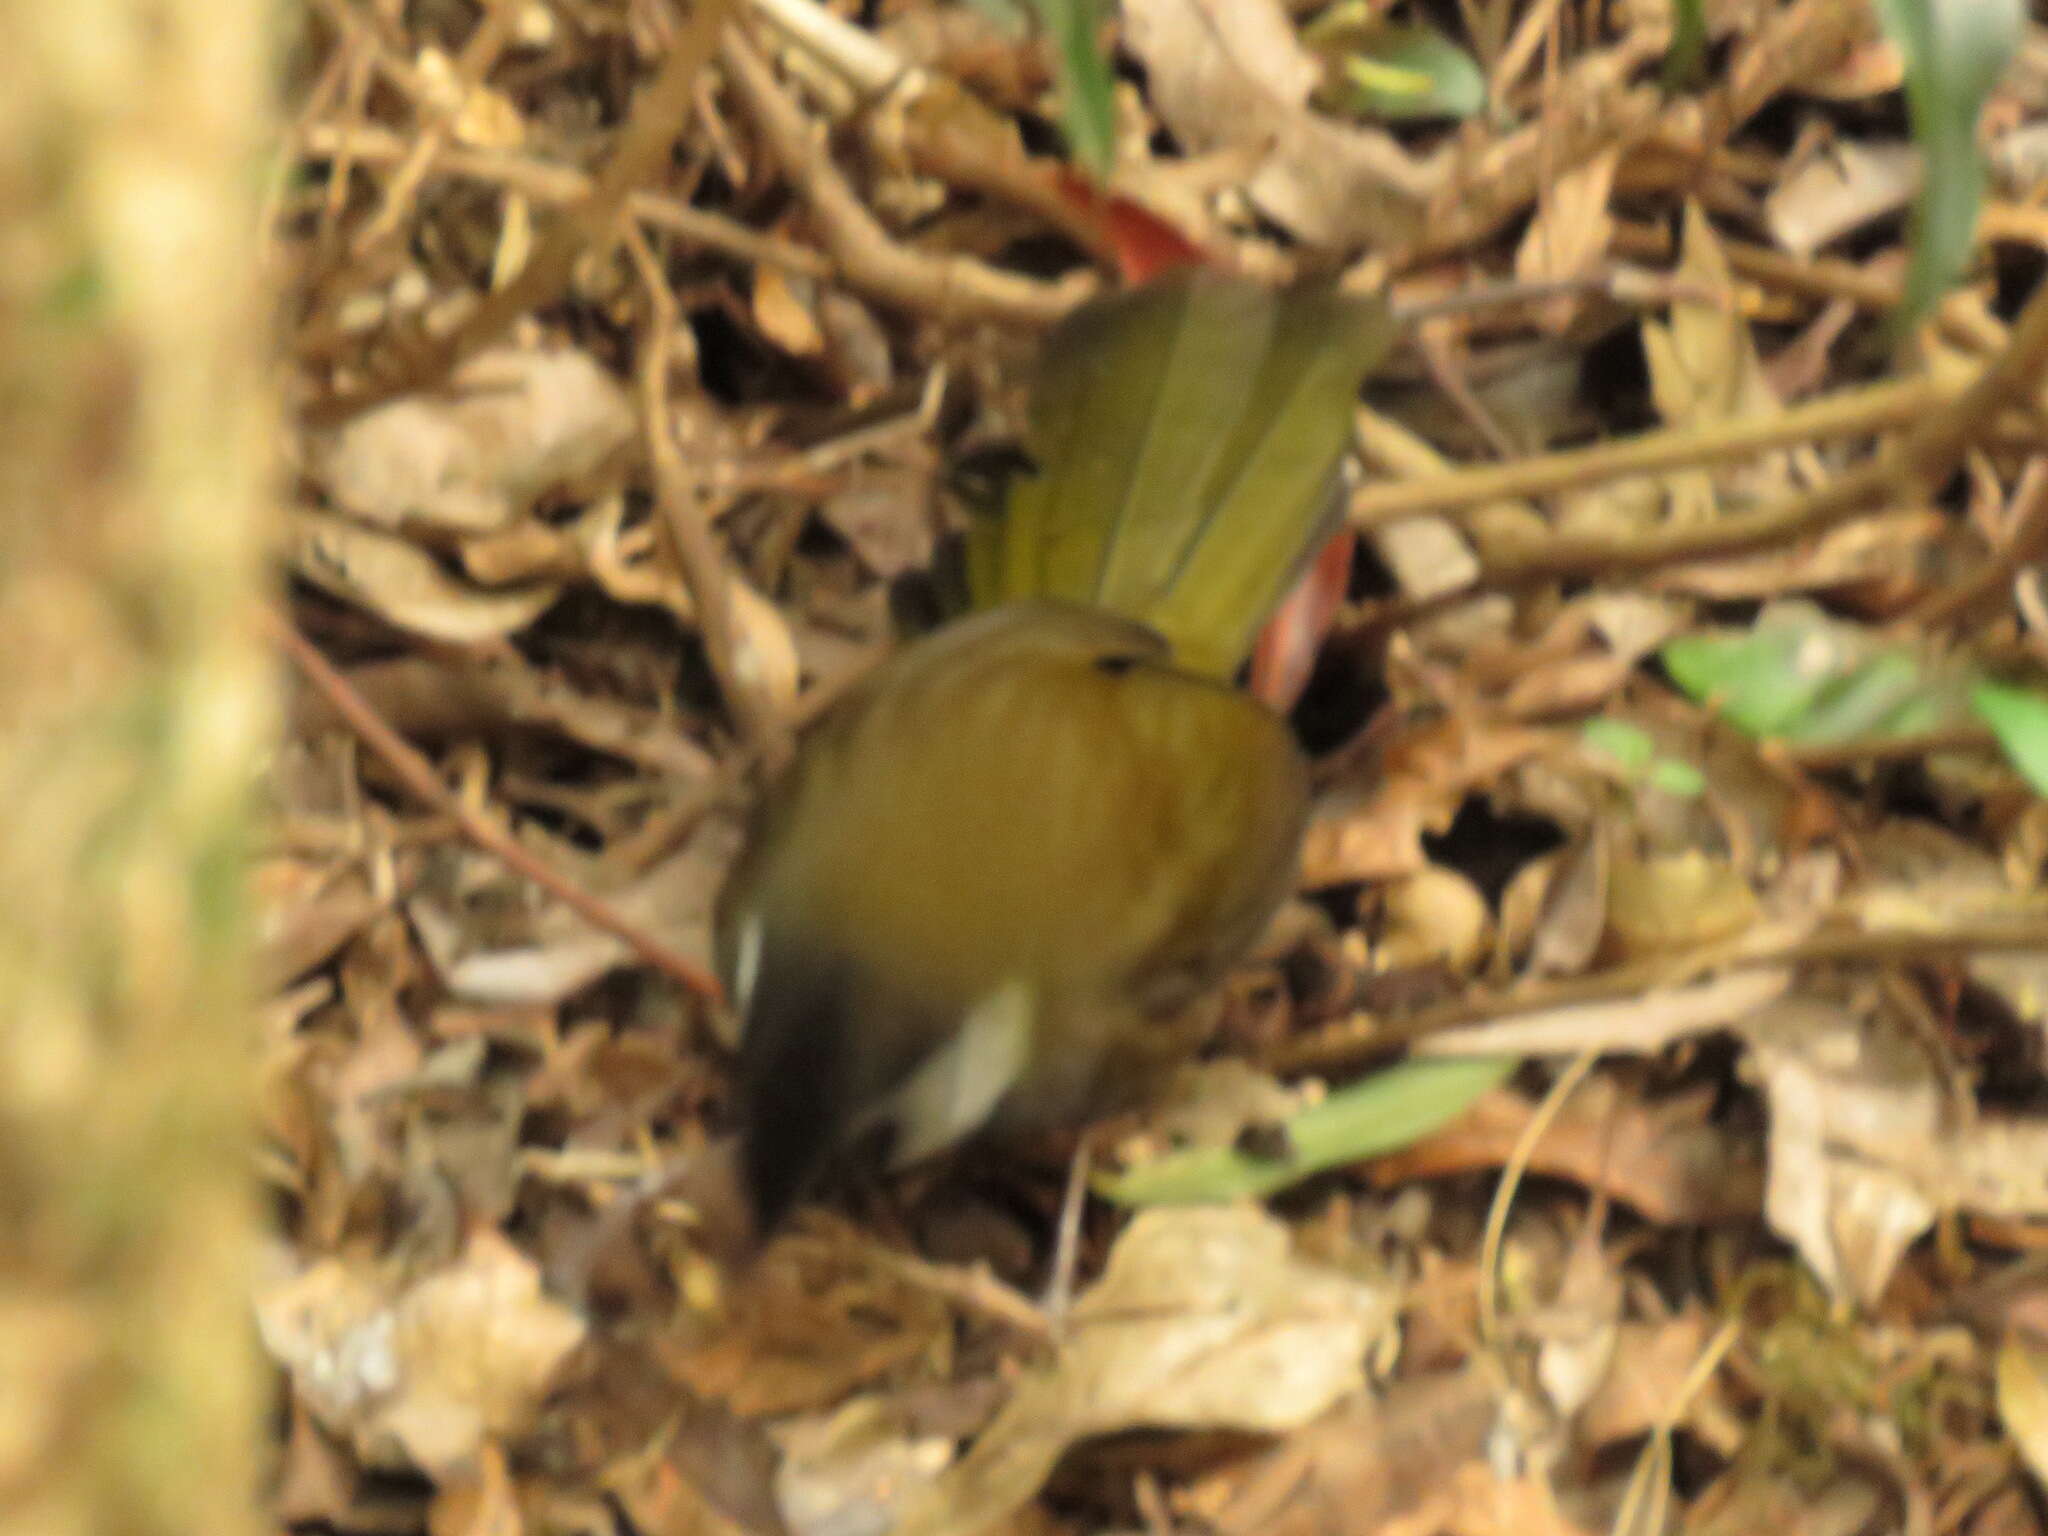 Image of Eastern Whipbird